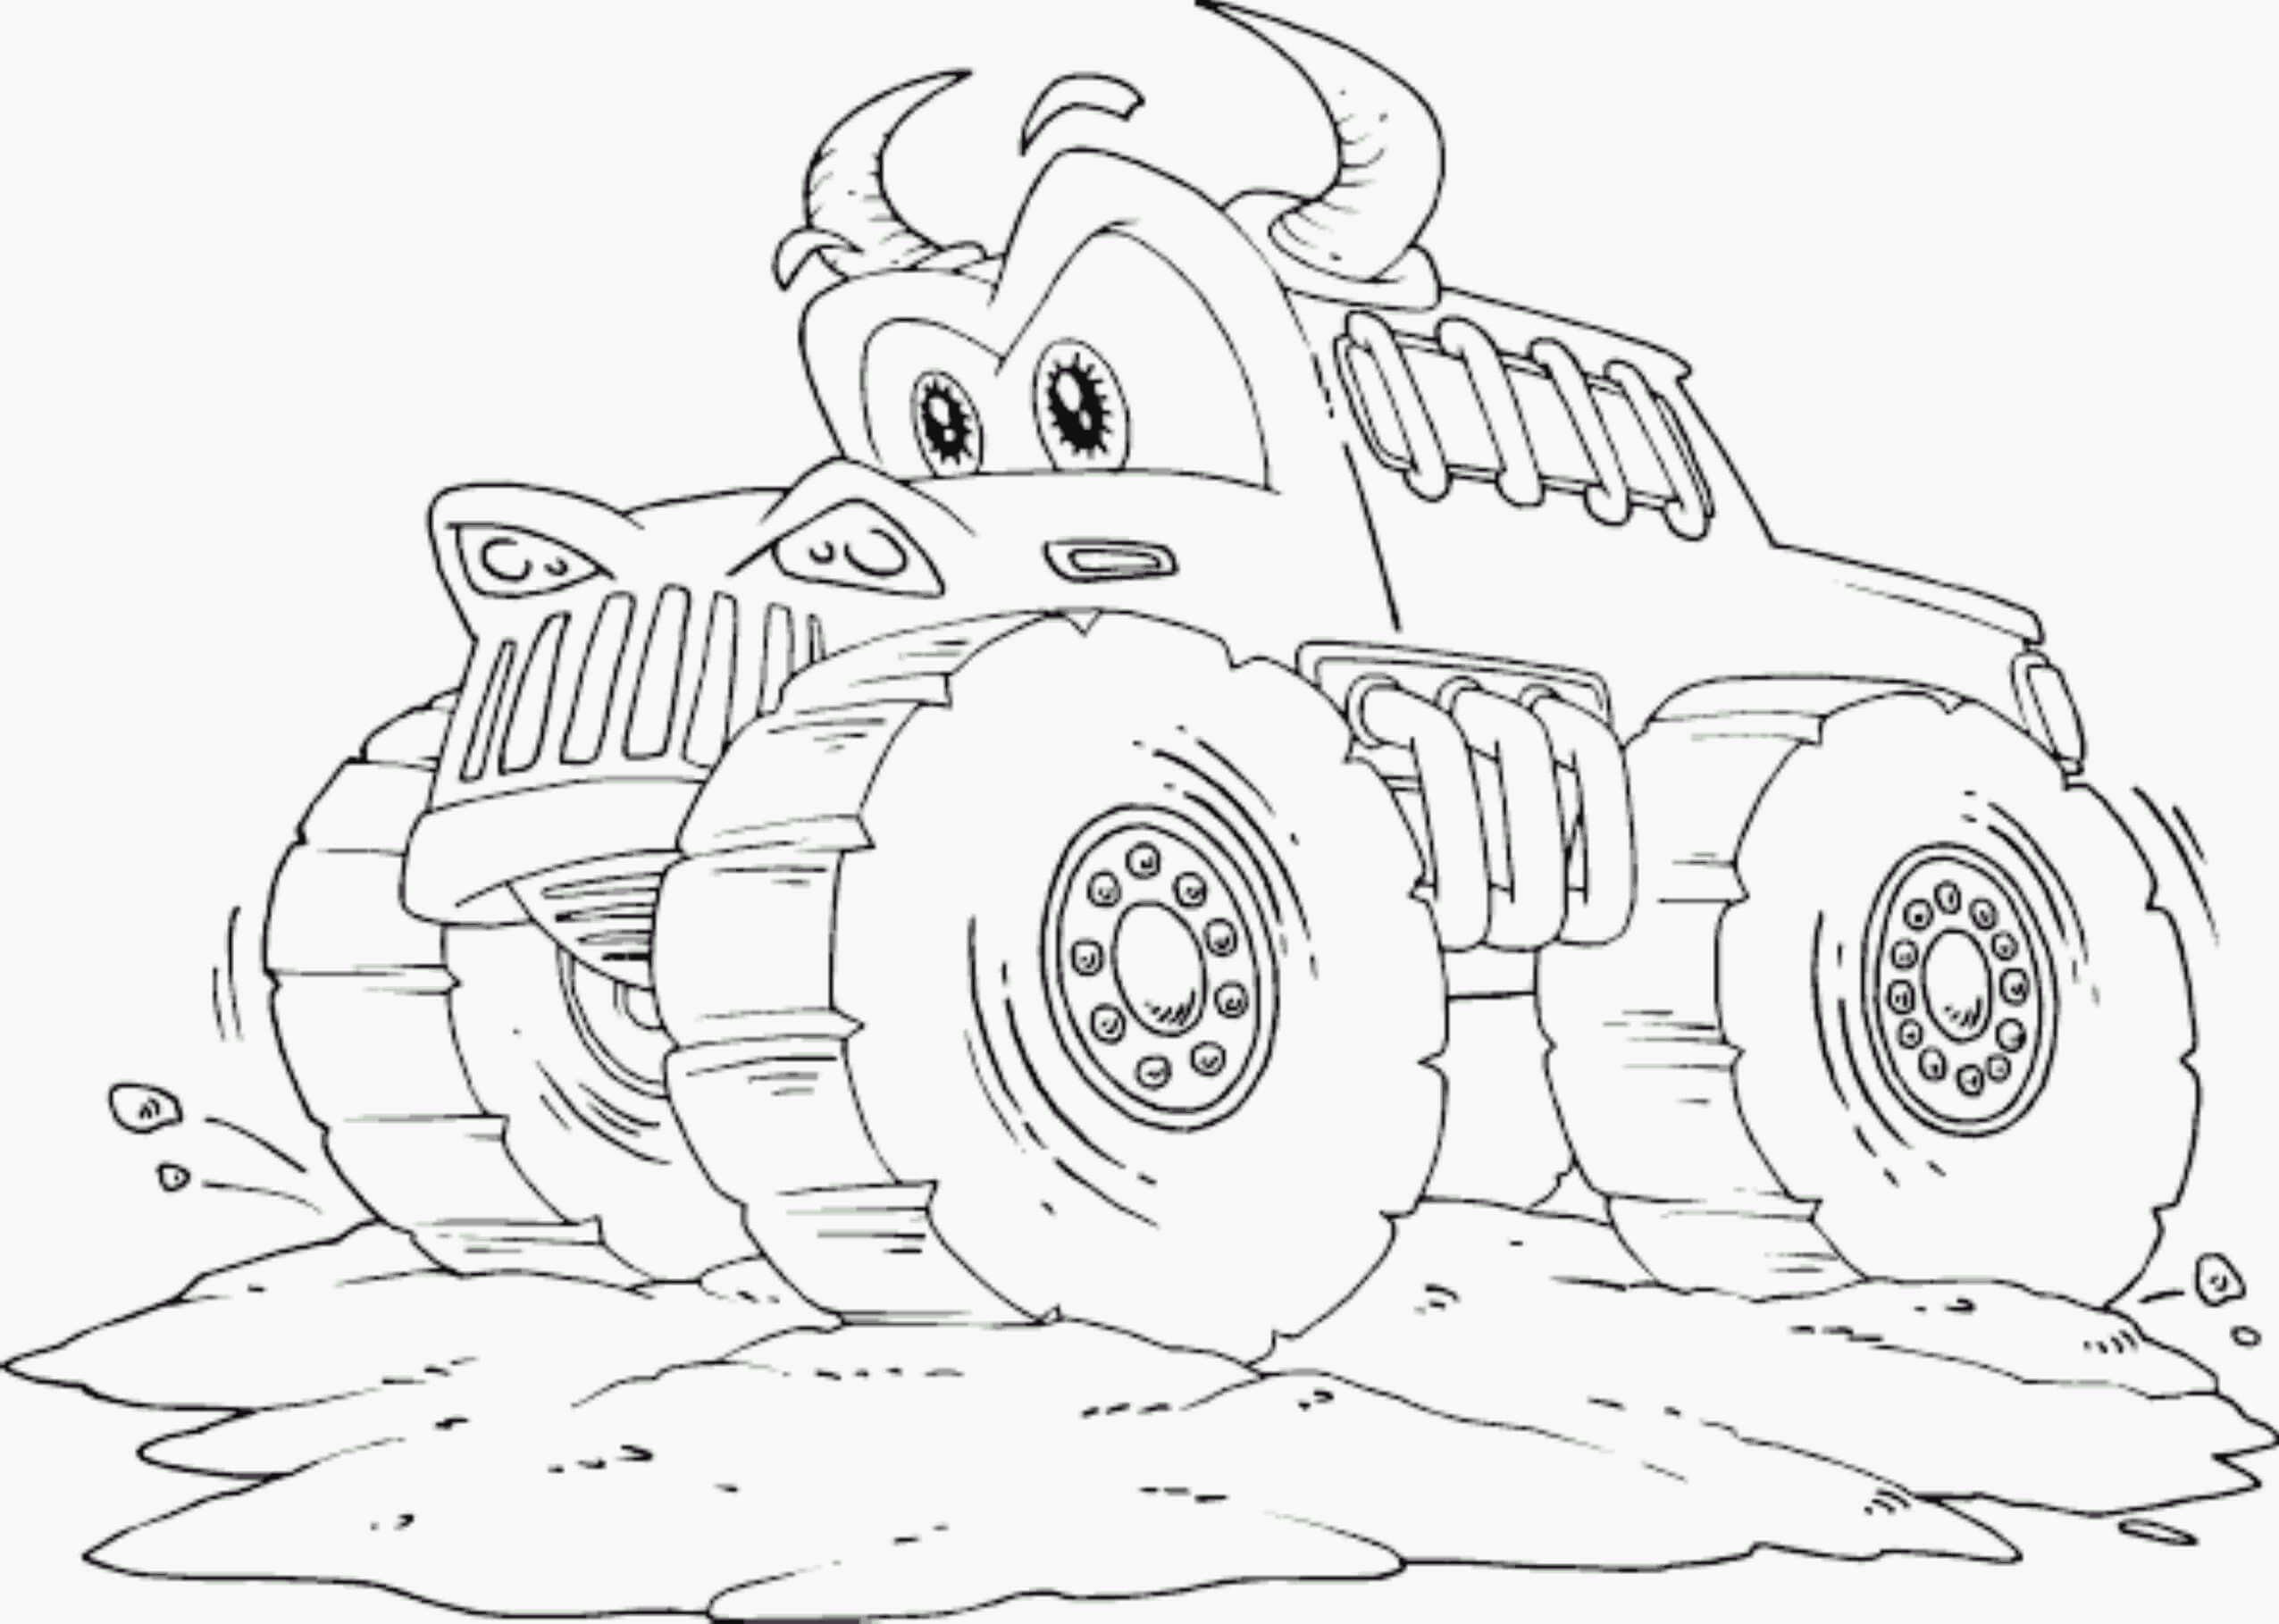 Cars 3 Coloring Pages at GetColorings.com | Free printable colorings